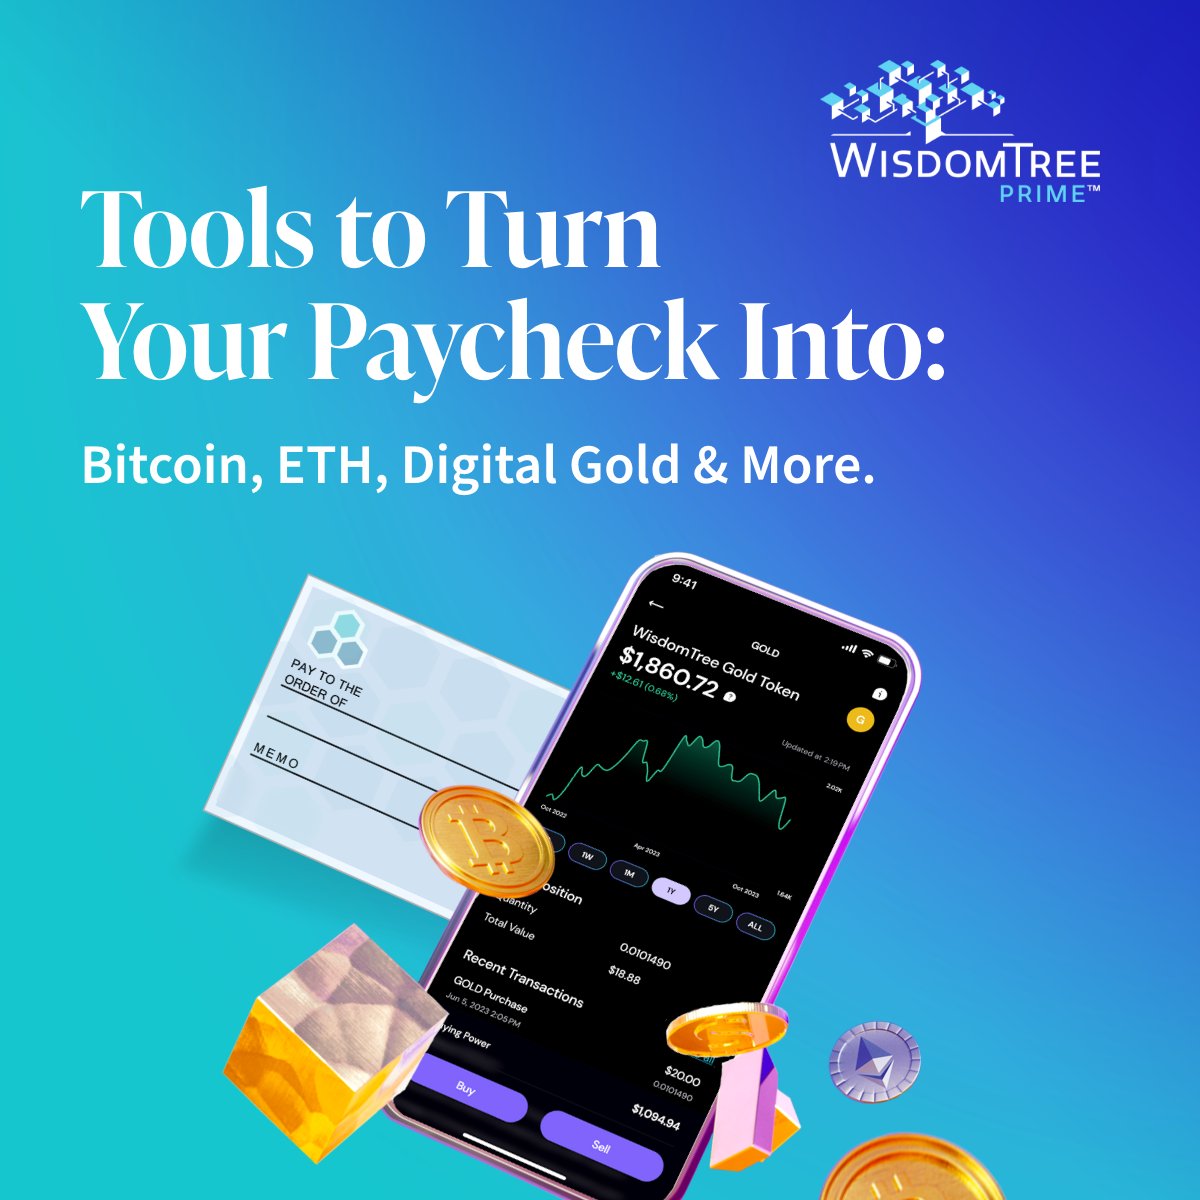 What if you could turn your paycheck into Bitcoin? 

With tools from WisdomTree Prime, you can turn your paycheck into Bitcoin, ETH, Digital Gold, and so much more!

Download Now: app.wisdomtreeprime.com/owuo/lv7shqk9